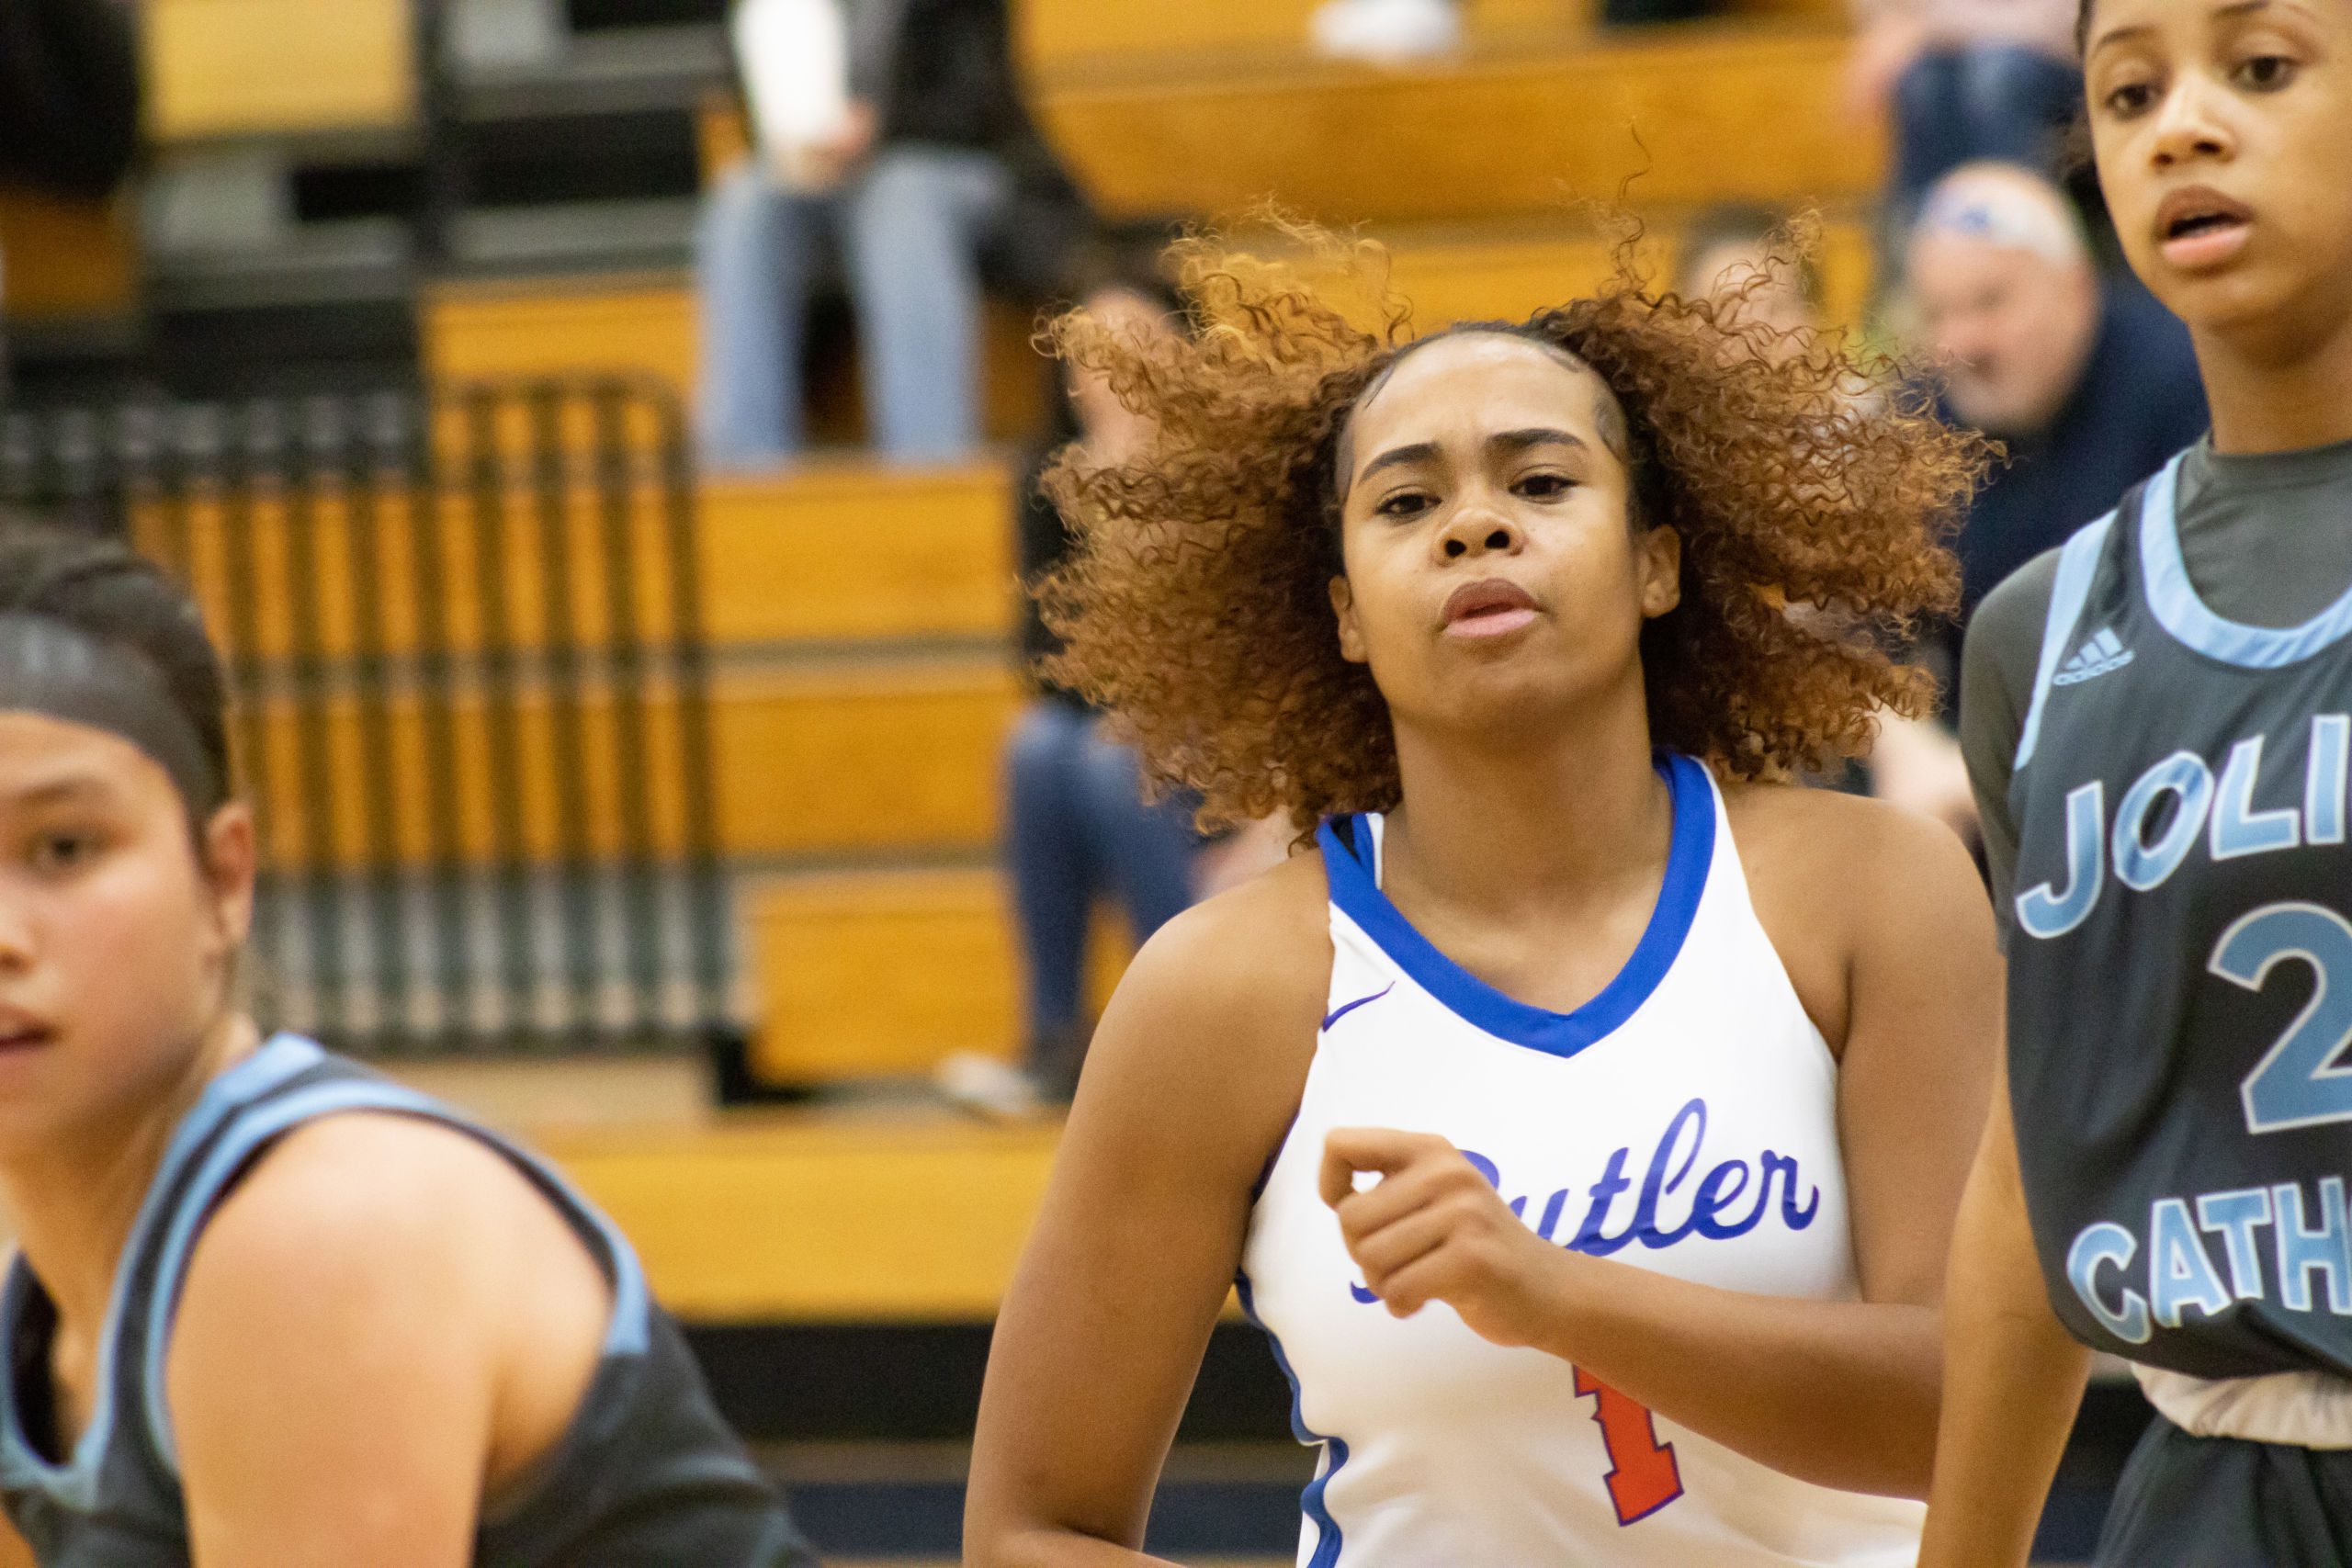 This photo shows a close-up of Xamiya running to the other end of the court with a face of concentration and effort. Opposing players are running on both sides of her.